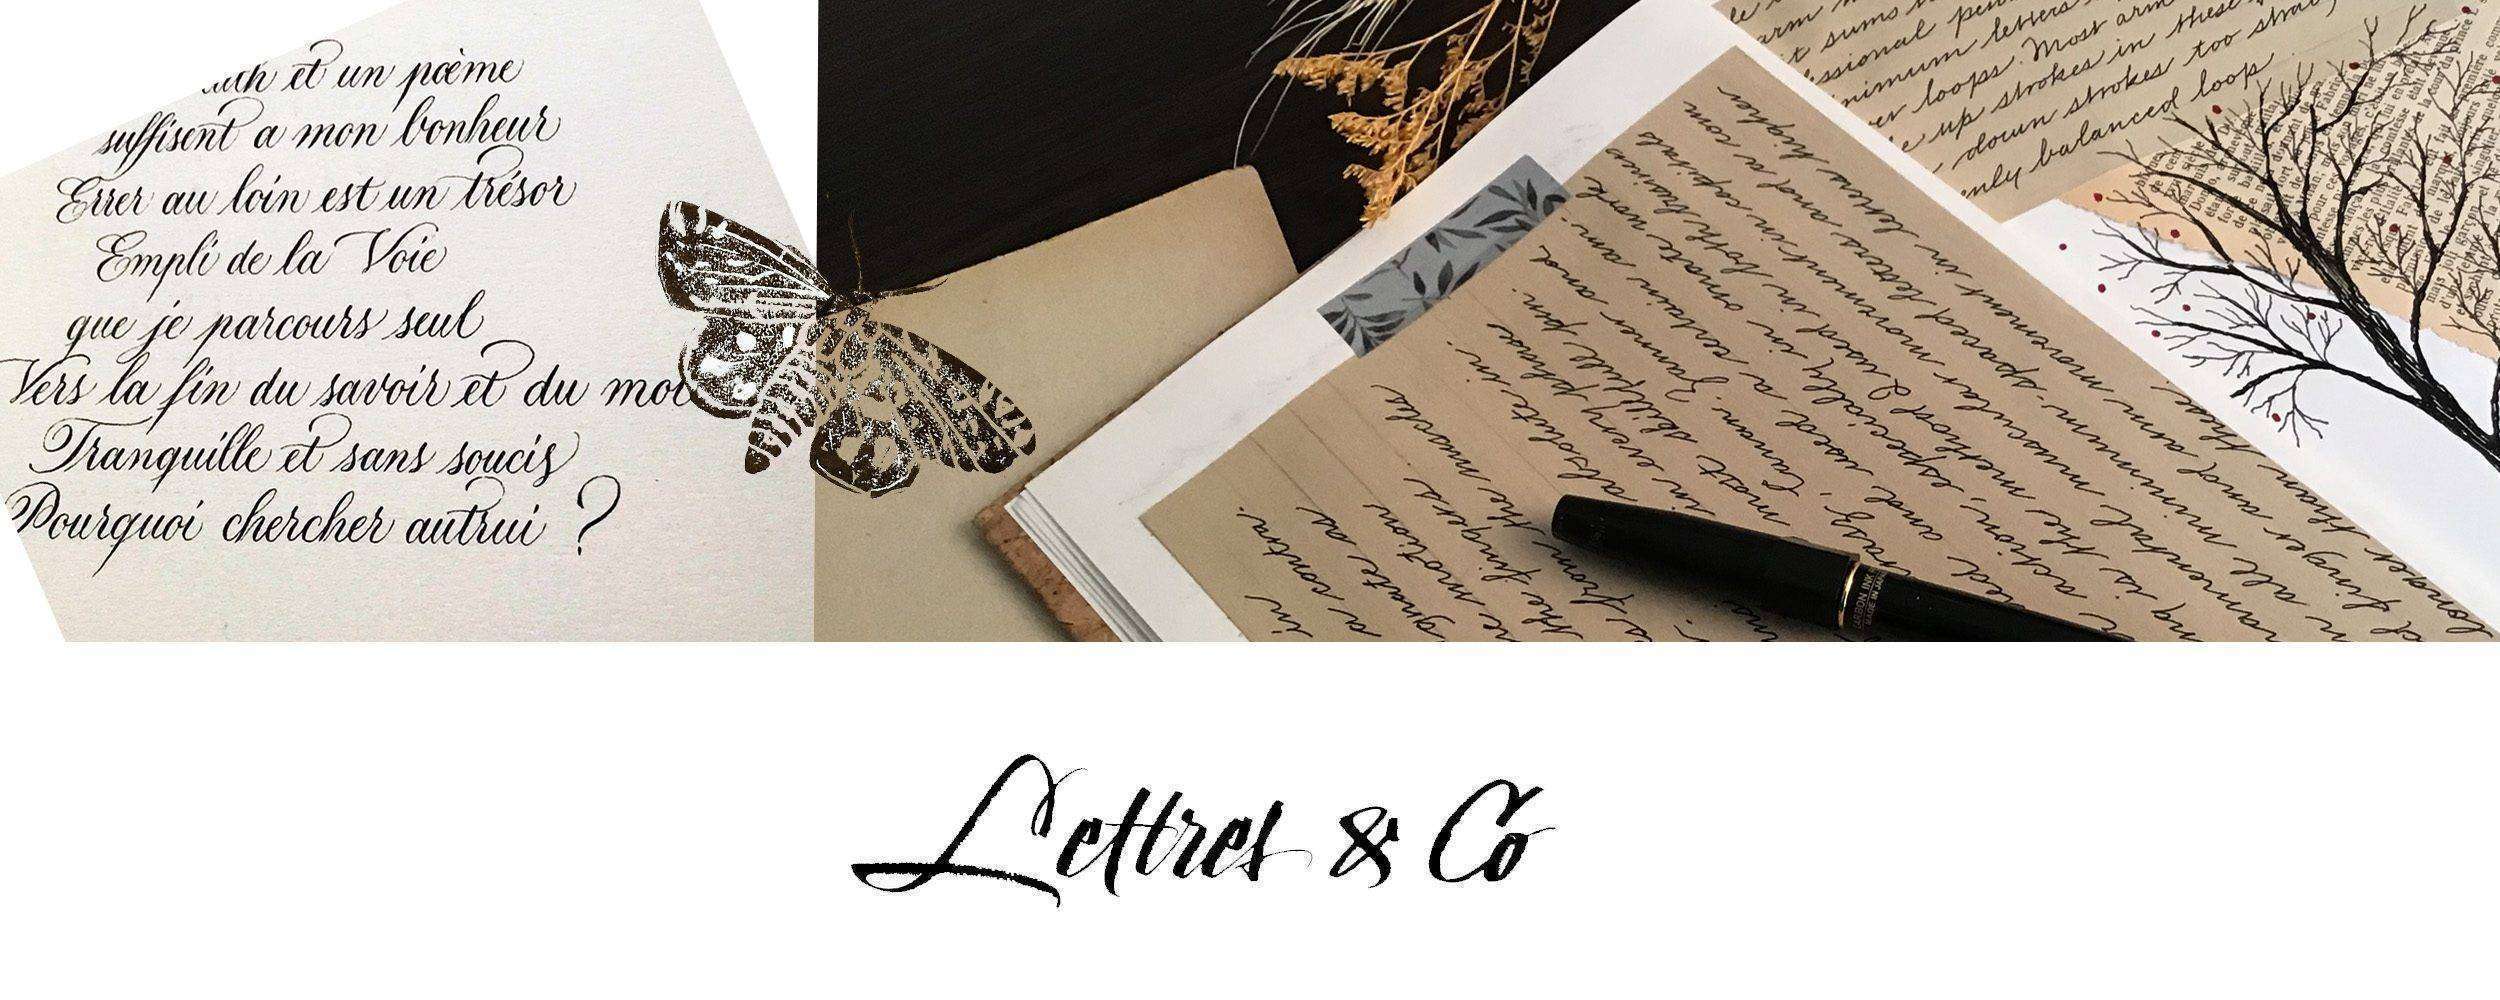 Lettres & Co